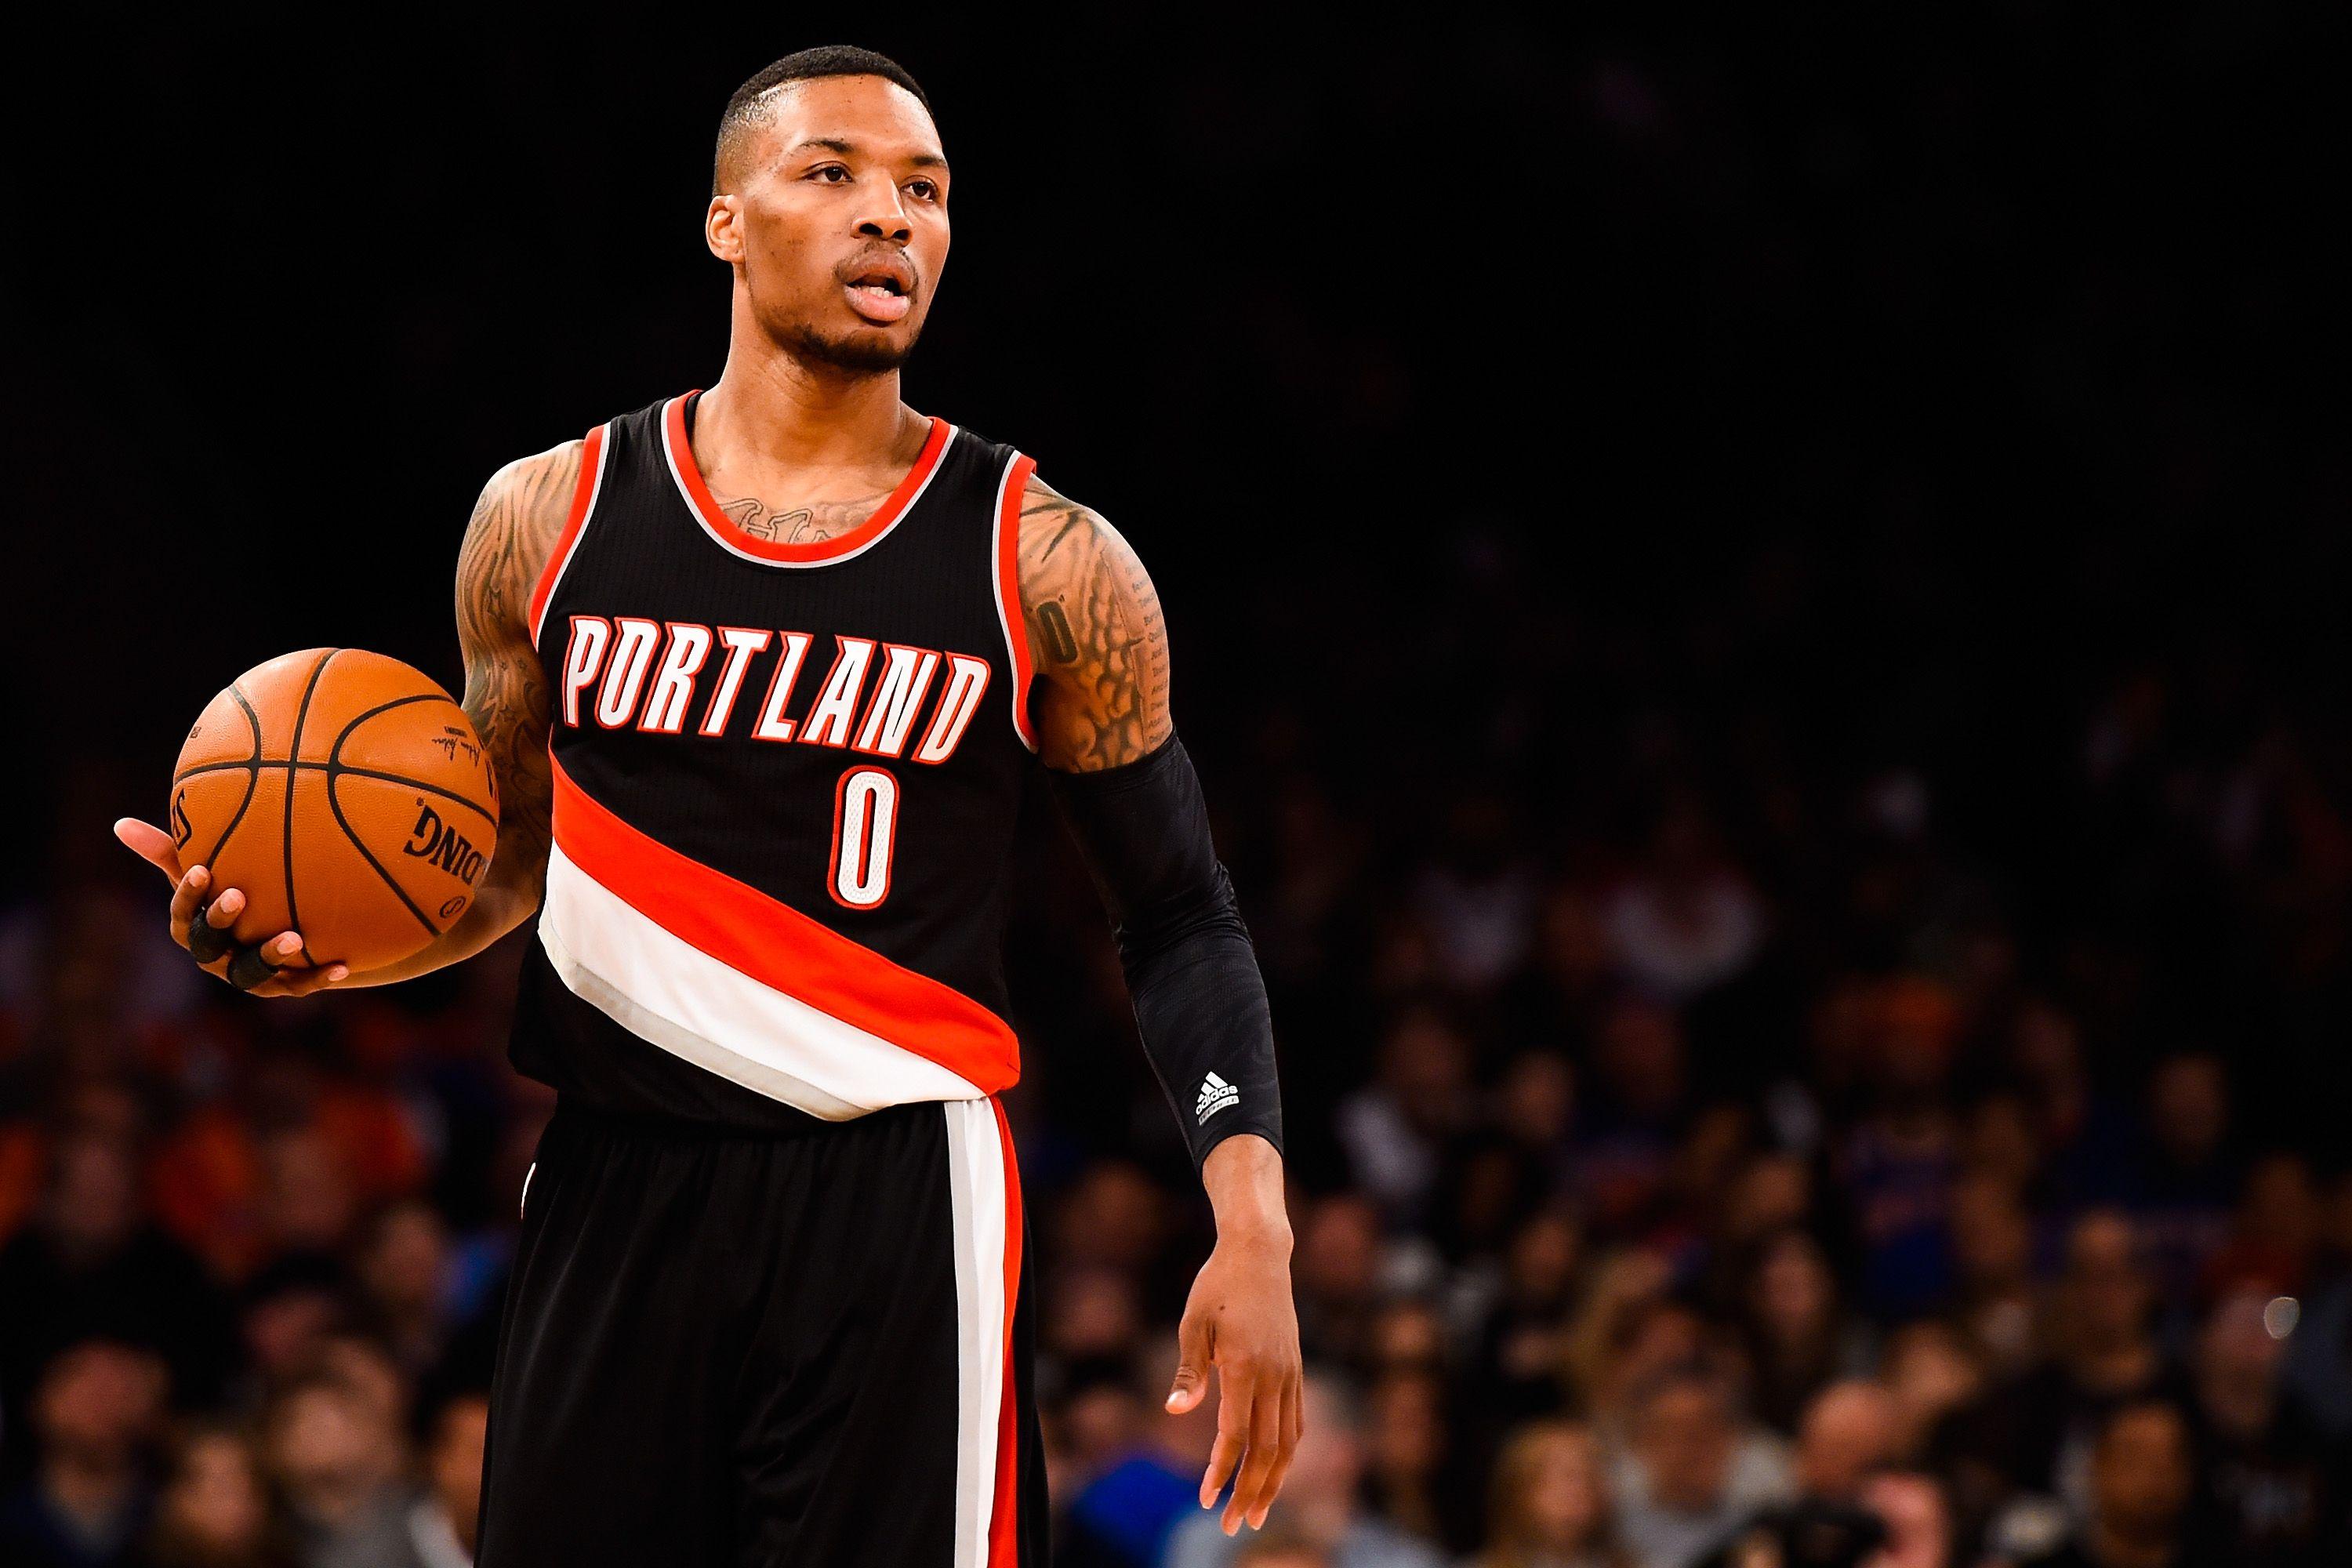 Northwest Division Preview: Portland Trail Blazers Have Few Other